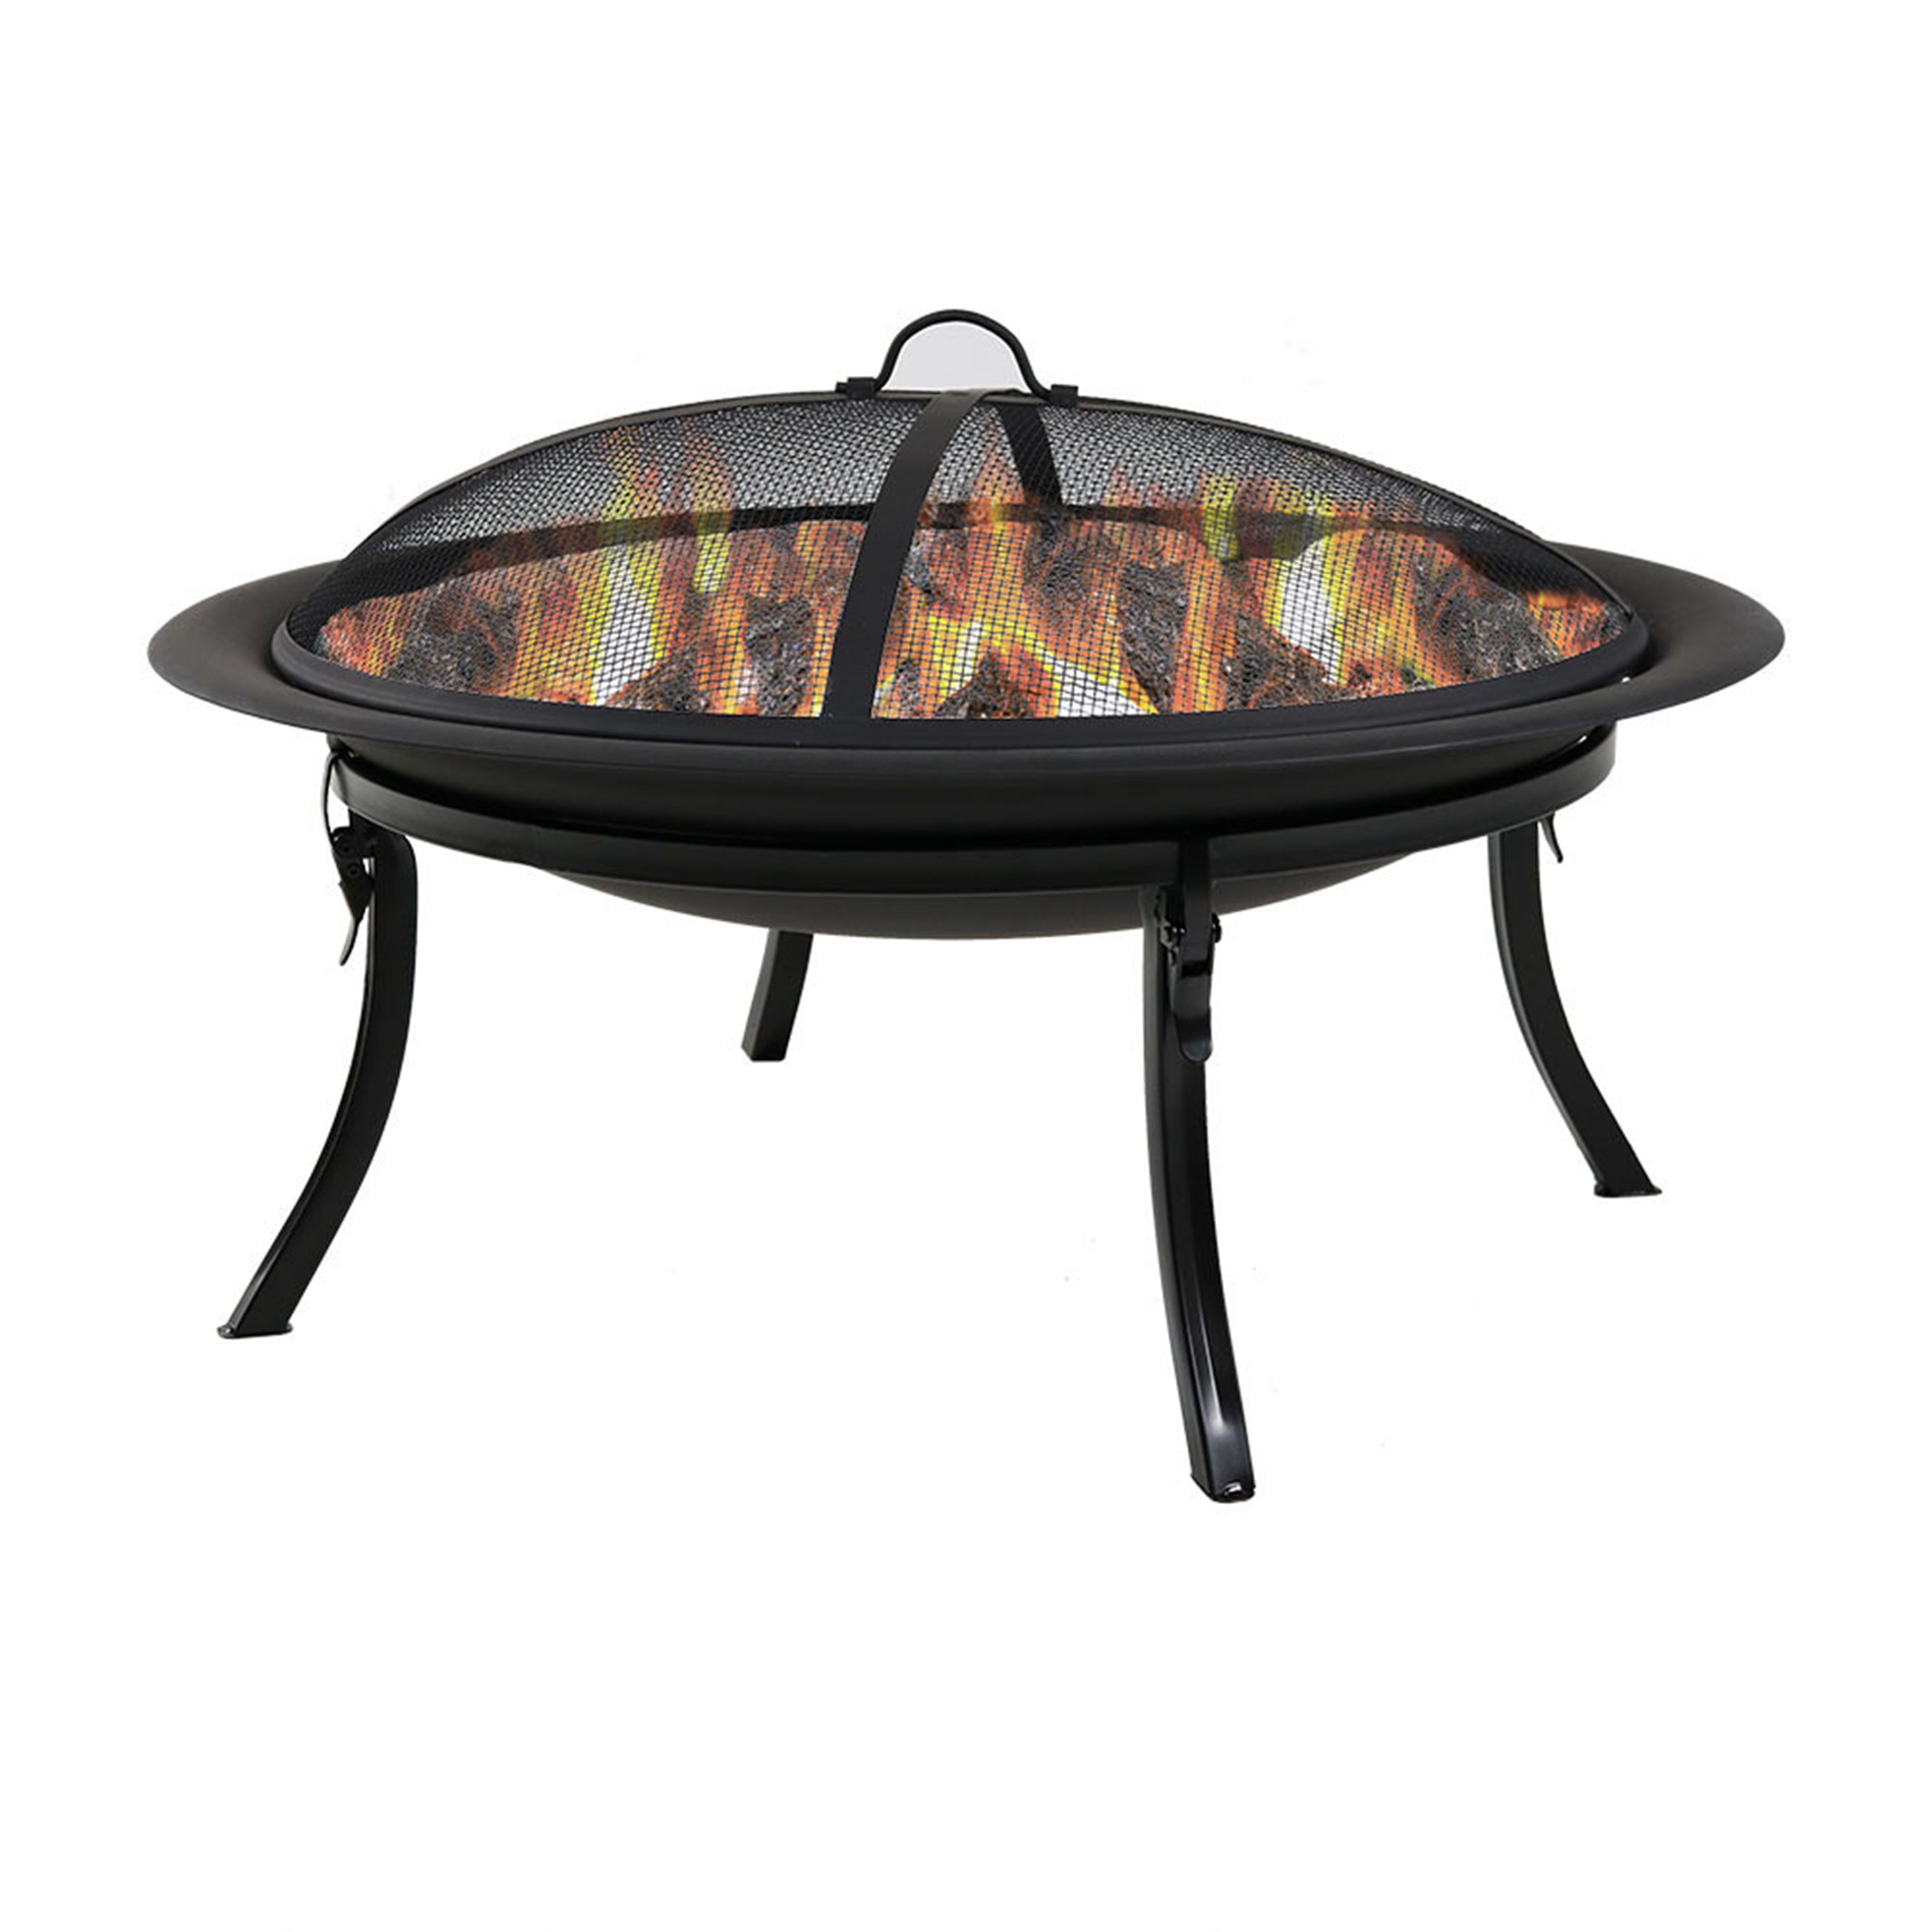 29 in Fire Pit Bowl with Folding Stand, Case, and Screen